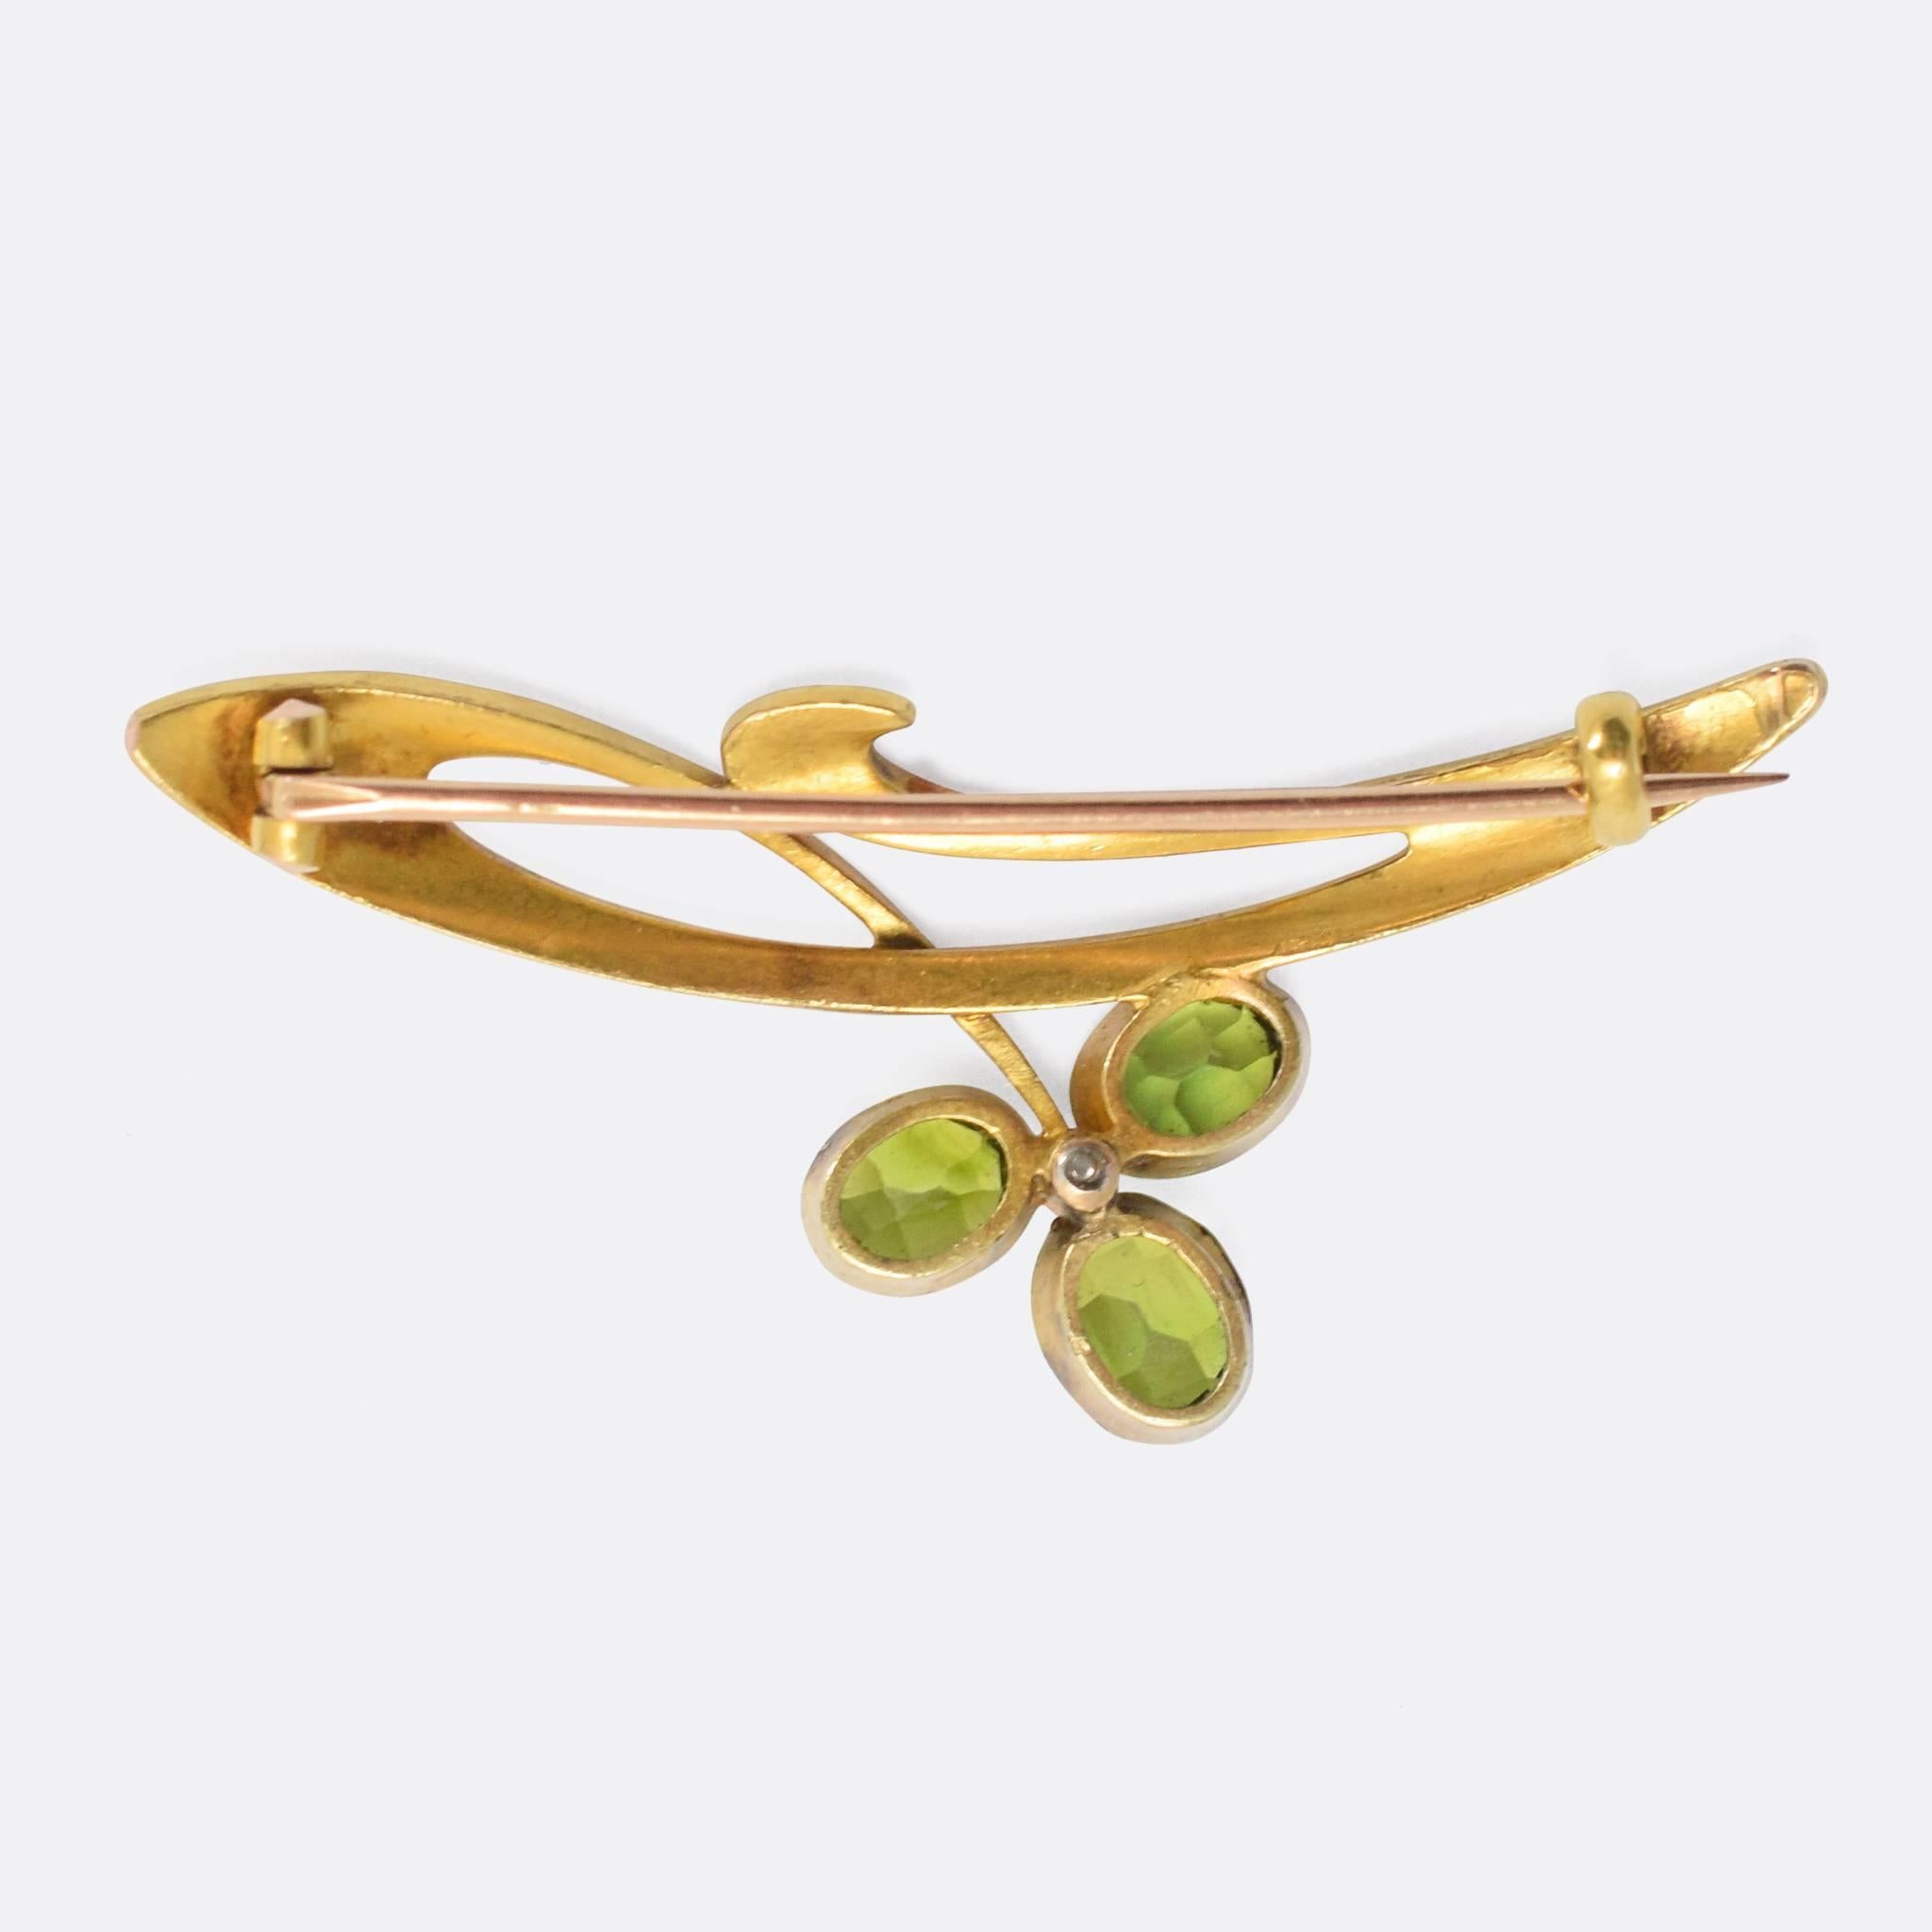 A superb antique Russian brooch, modelled in the Art Nouveau style. Worked in 14k (56 zolotnik) gold, the brooch is crafted as a stylised flower set with vibrant green garnets and a ruby cabochon - with elegant flowing goldwork typical of the era.